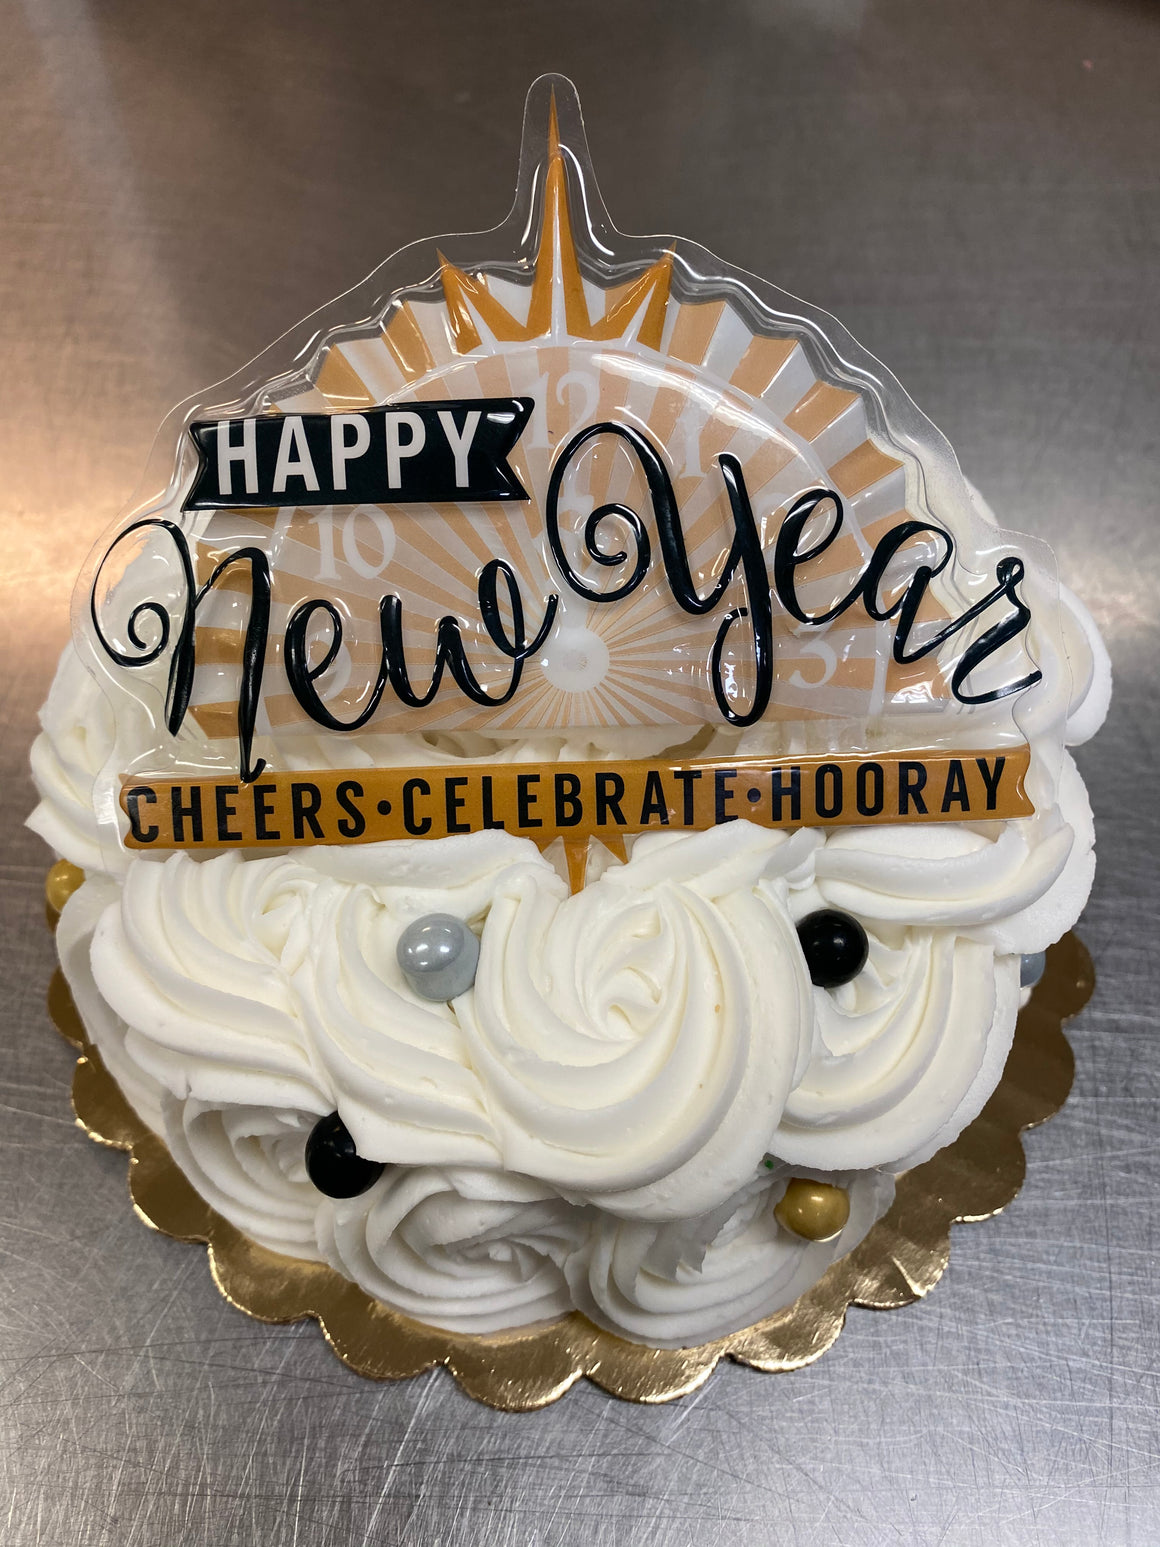 New Years Eve Theme Ready To Party 6" Single Layer Cake